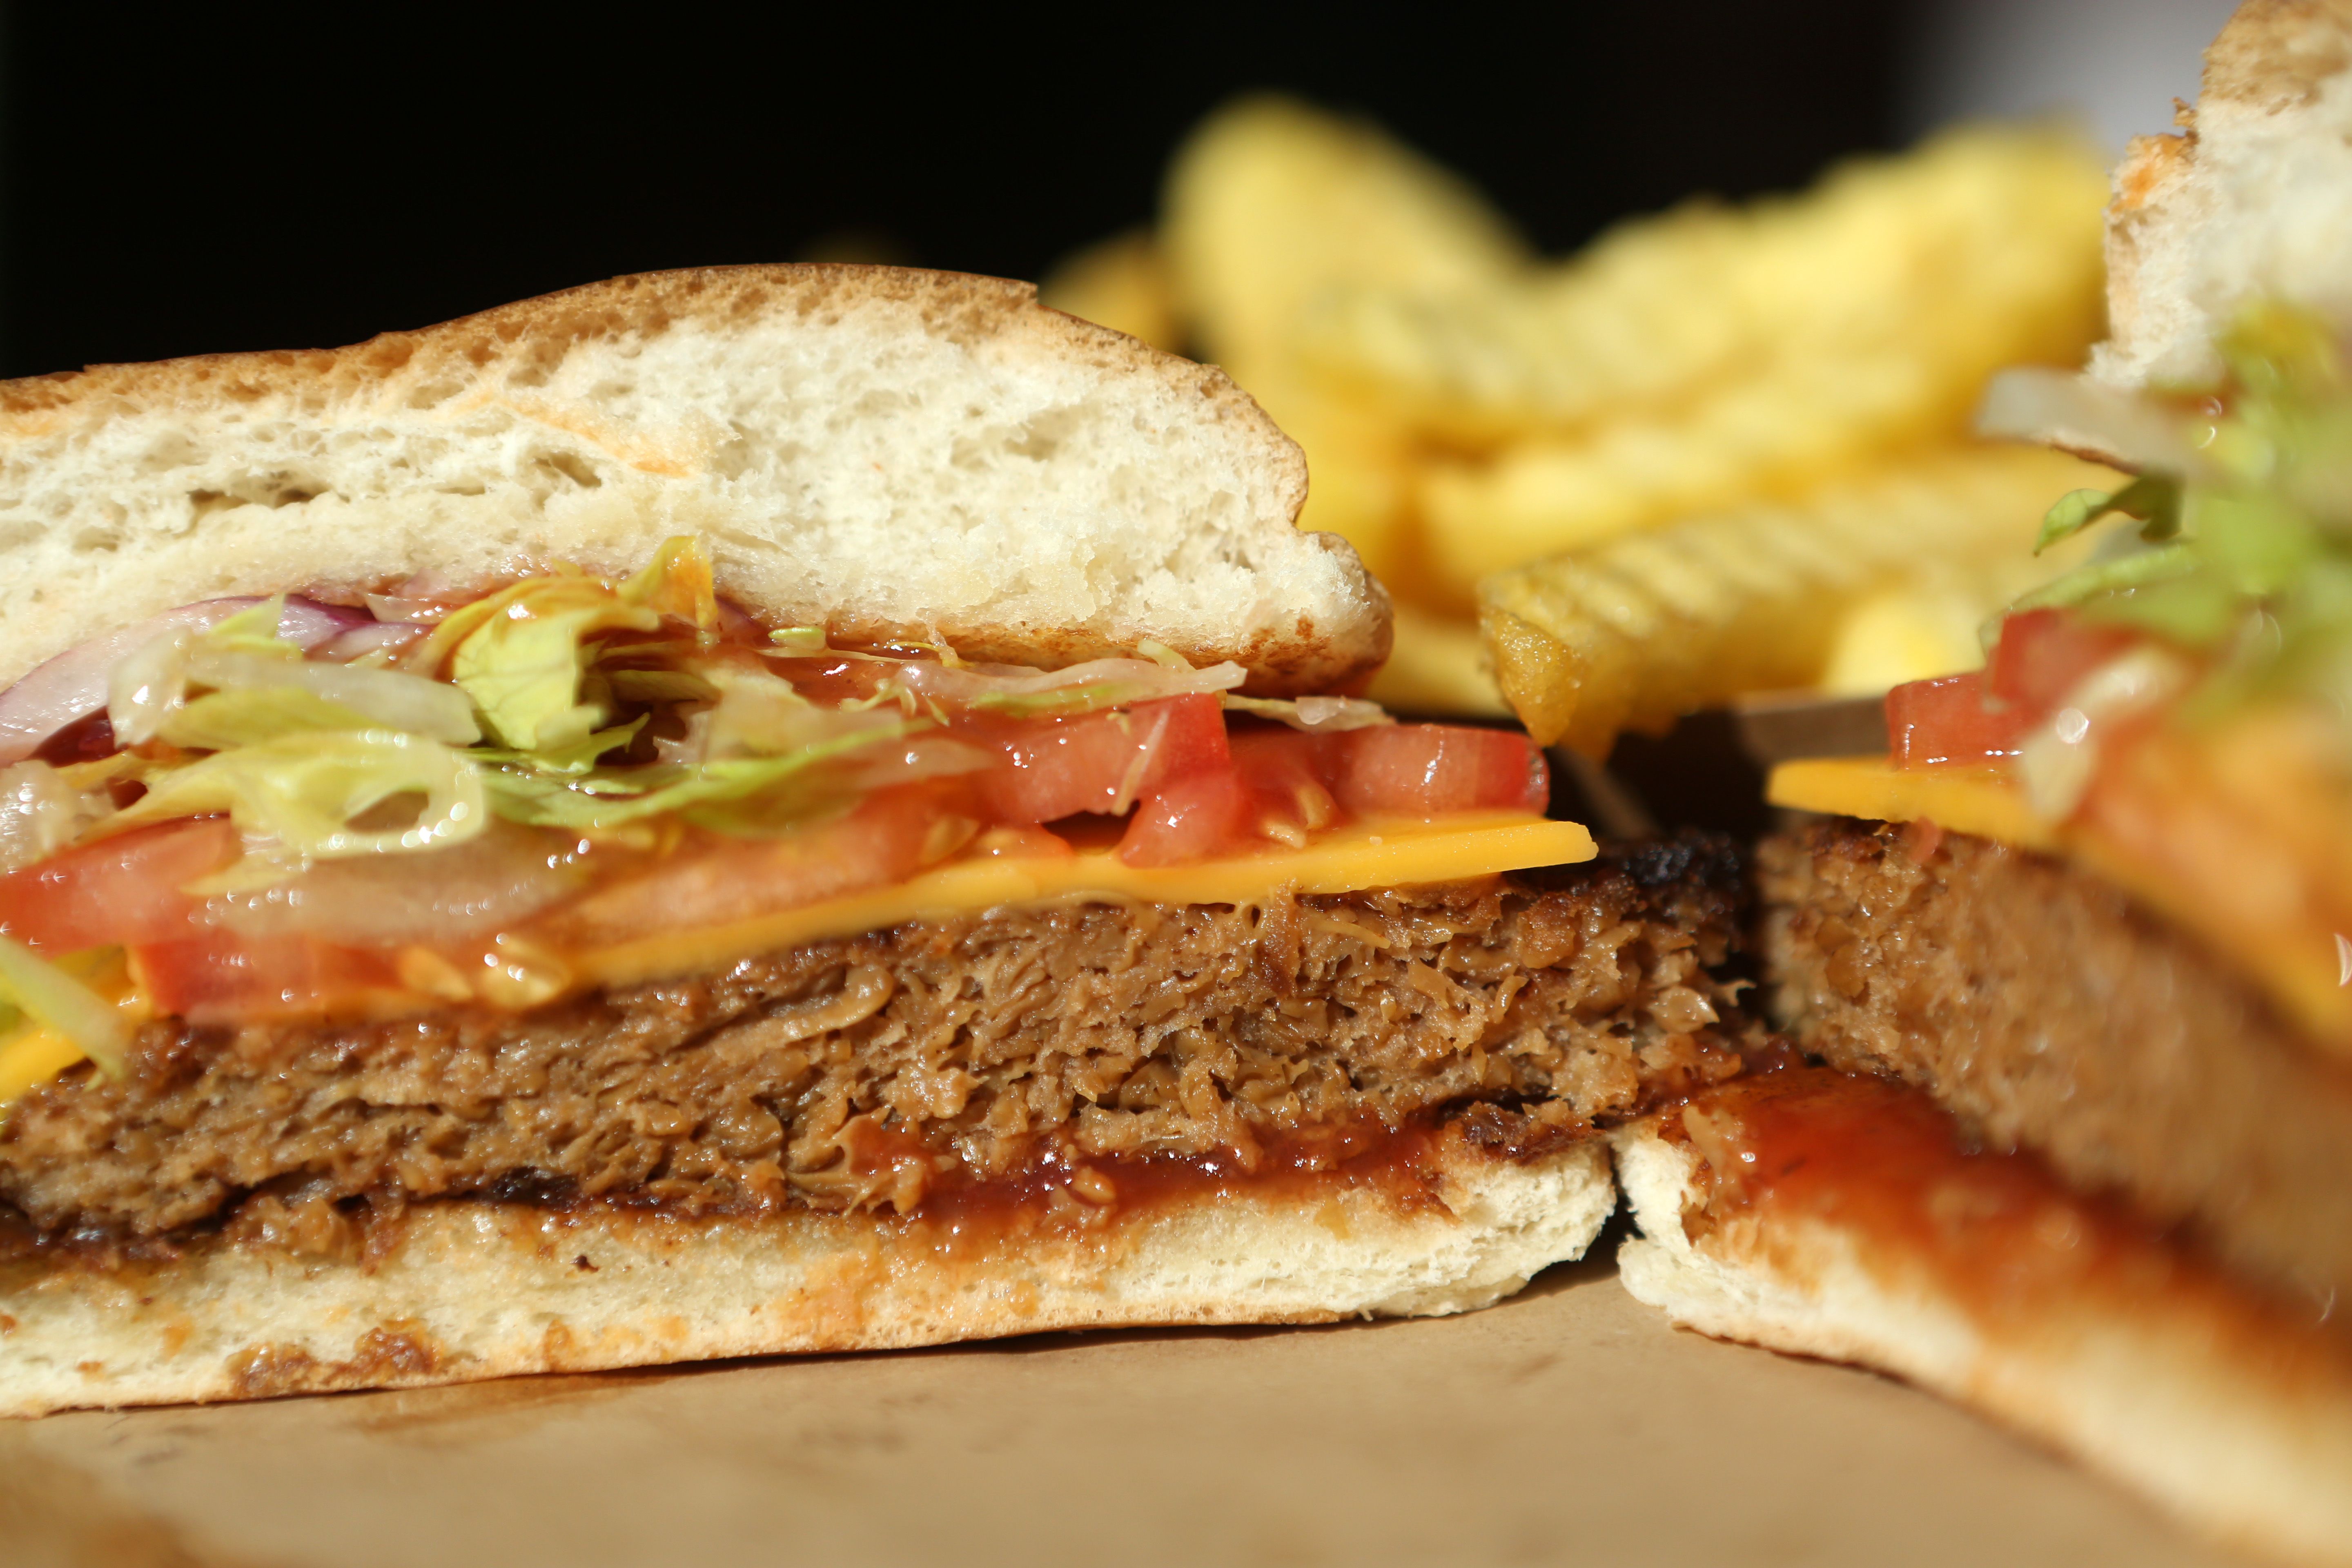 Are Beyond Meat's burgers healthier than red meat? Dietitians say no.